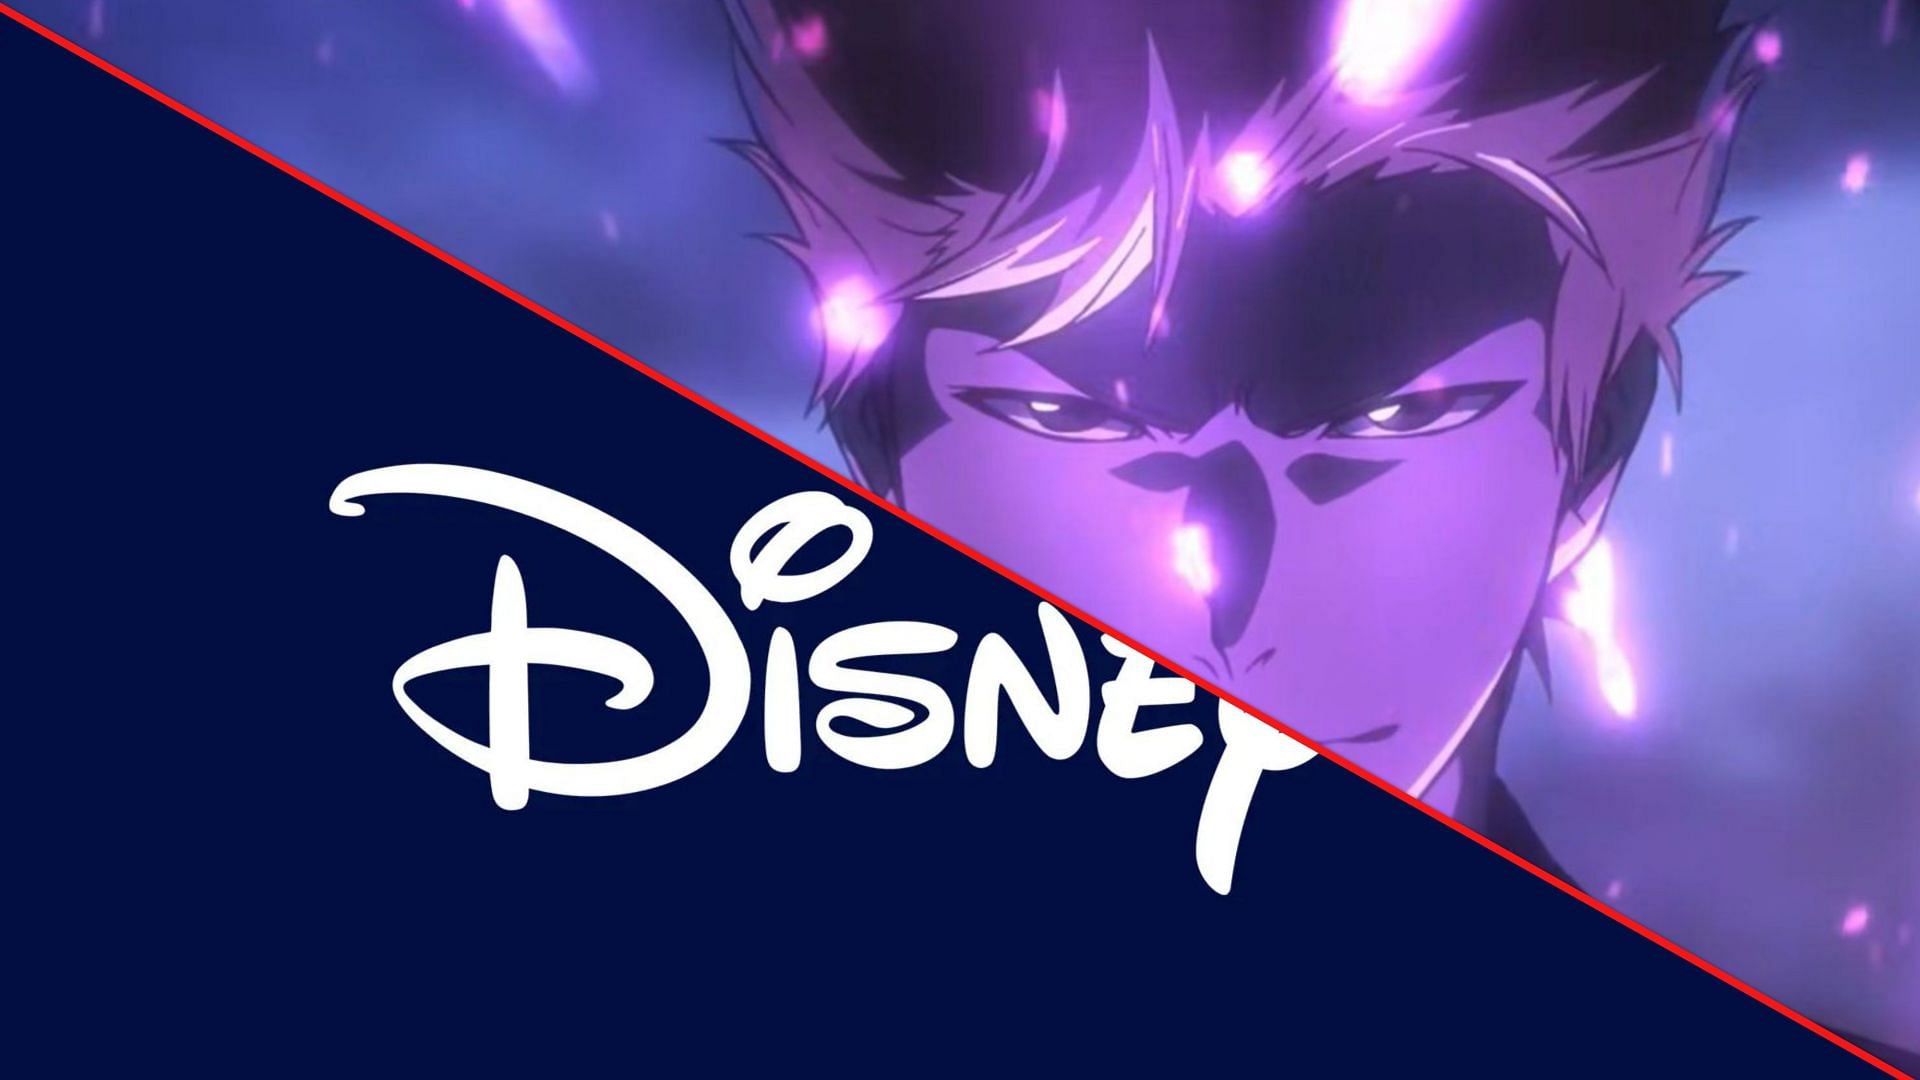 How Much Did Disney Pay For Bleach? - Own Your Own Future